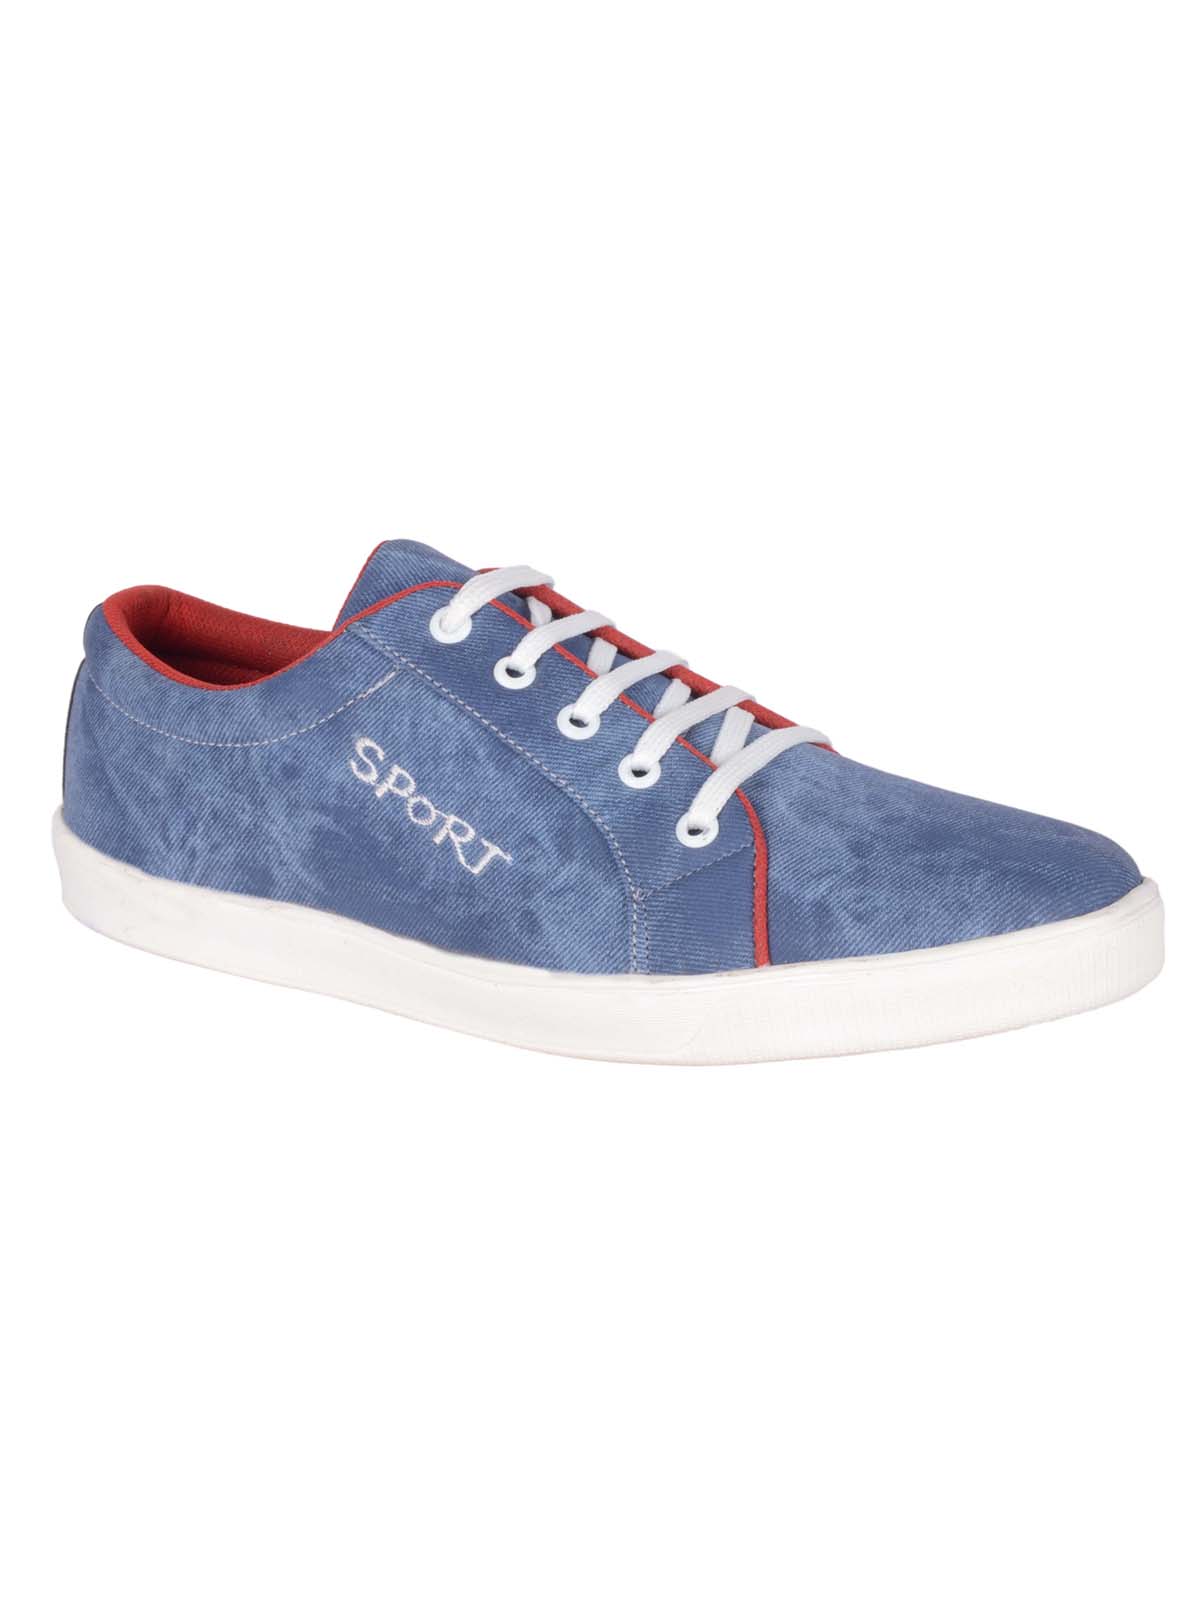 Buy Vajazzle Latest Fashion Blue Casual Men's Sneakers Online @ ₹1199 ...